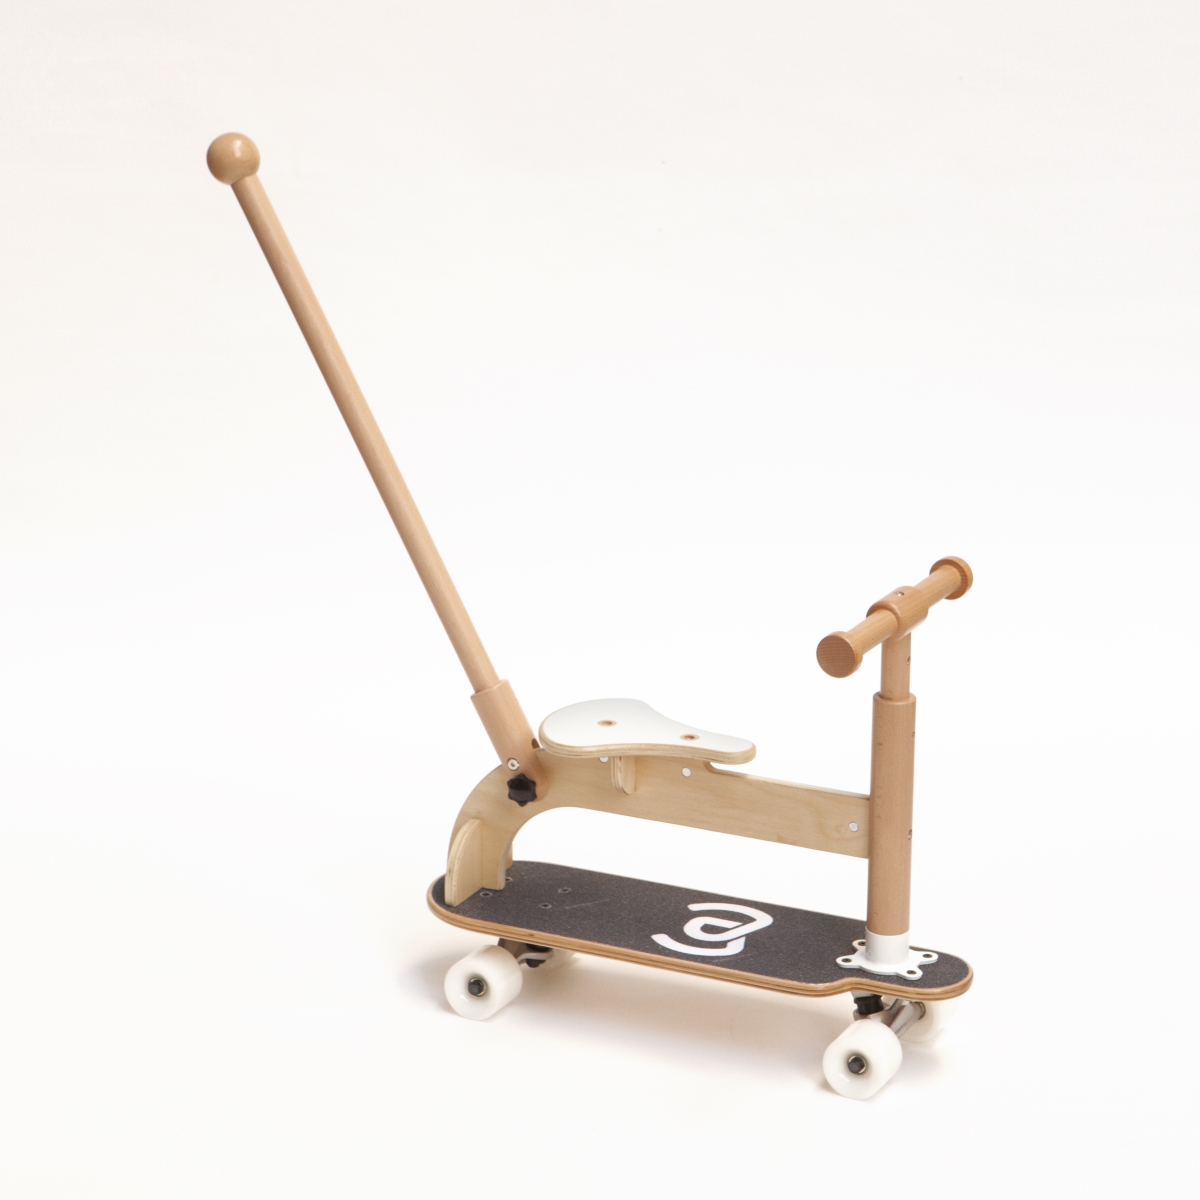 Picture of Mishidesign MD-OTB-01 Otsbo 6-In-1 First Approach to Skateboarding